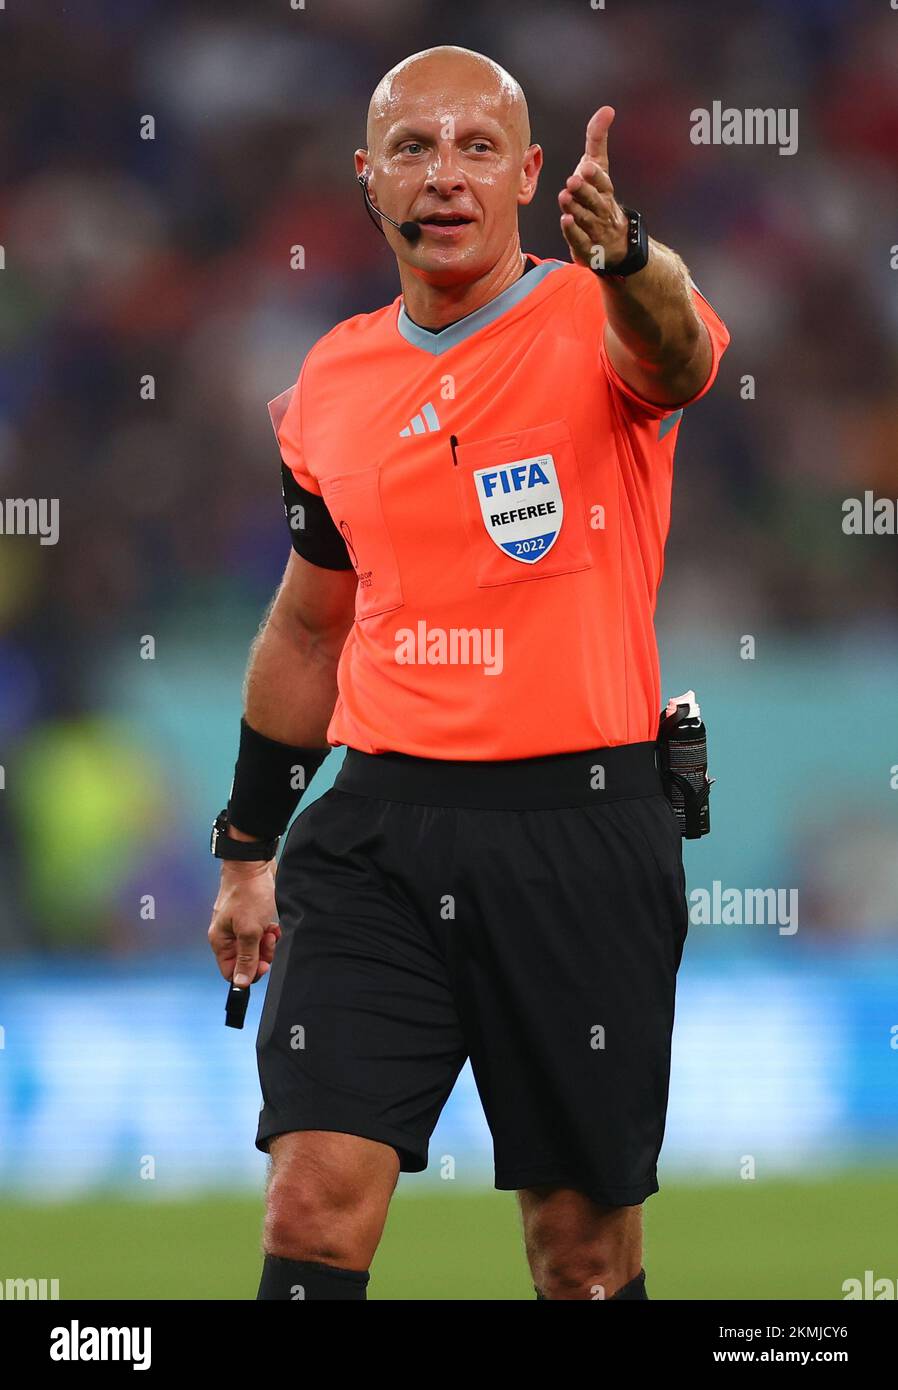 Doha, Qatar, 26th November 2022.  Referee Szymon Marciniak during the FIFA World Cup 2022 match at Stadium 974, Doha. Picture credit should read: David Klein / Sportimage Stock Photo